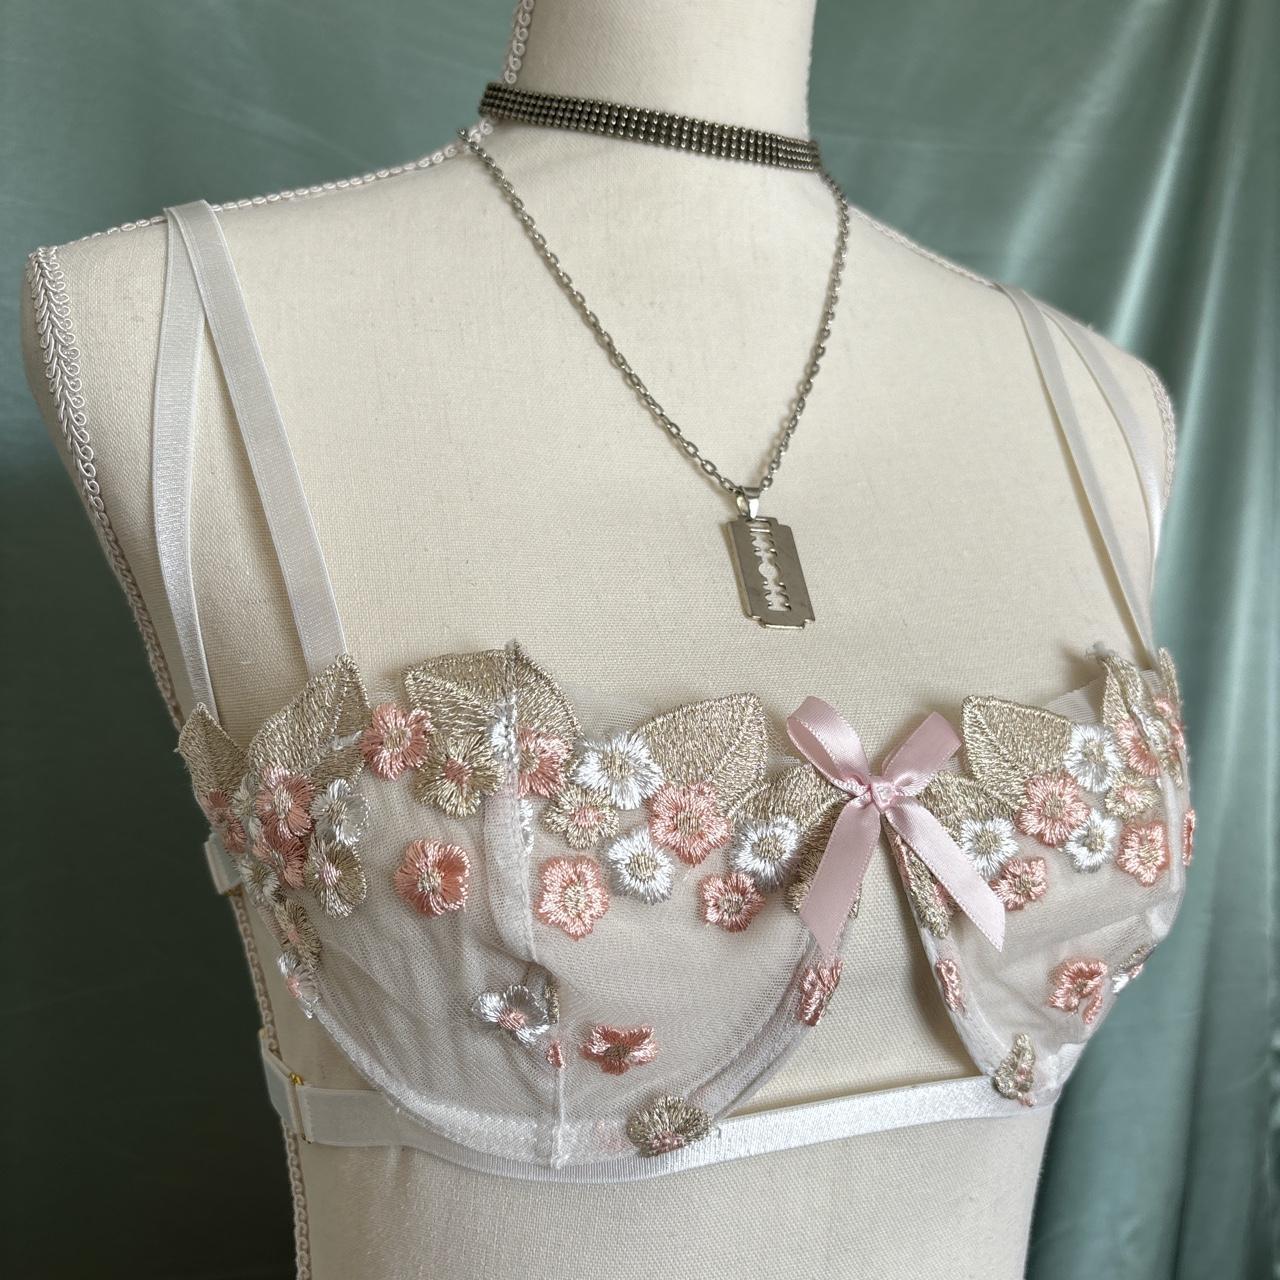 Sheer lace floral bra with bow •* size small •* - Depop